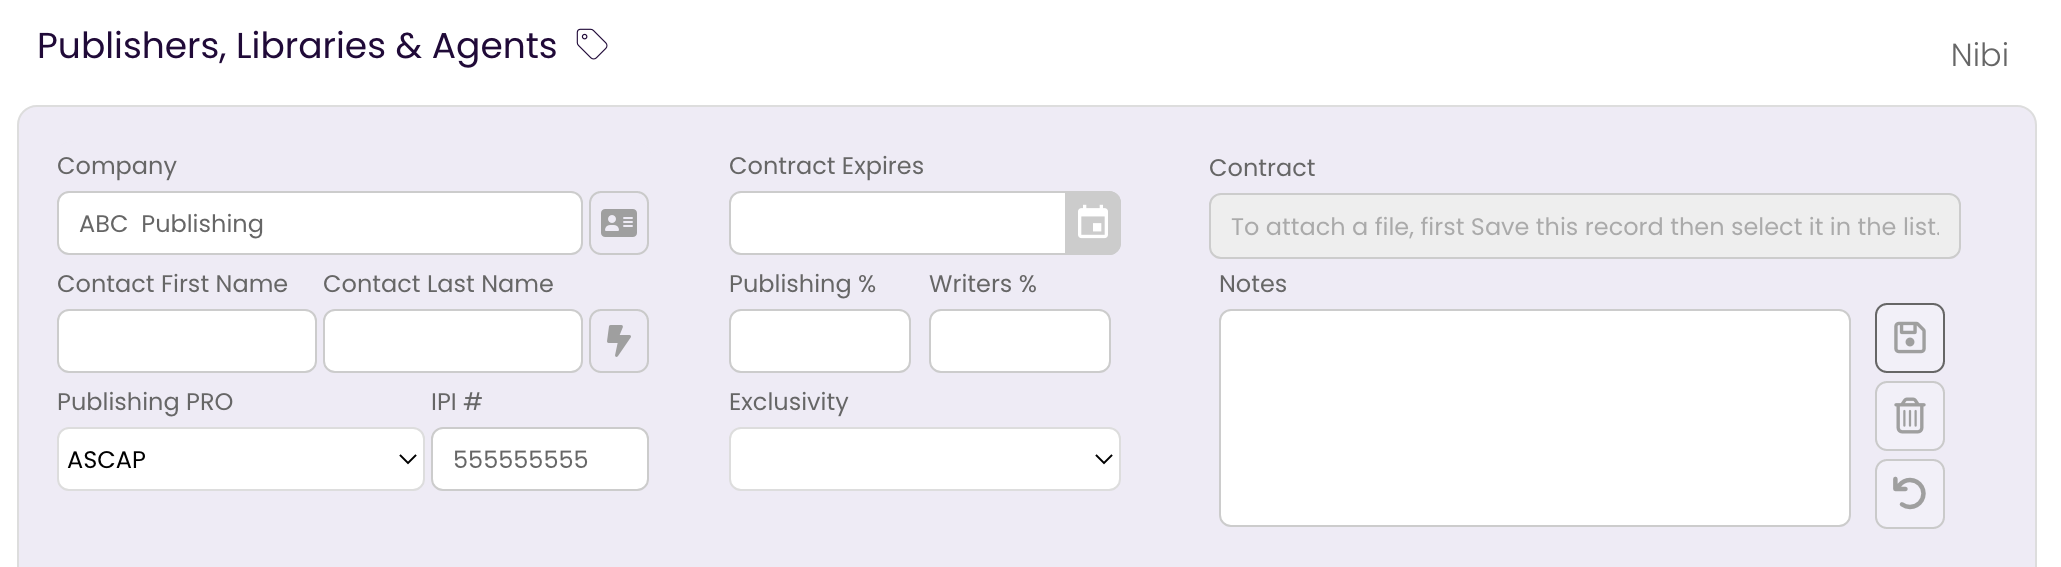 The Publishing Tab showing the selected contact information in the form.